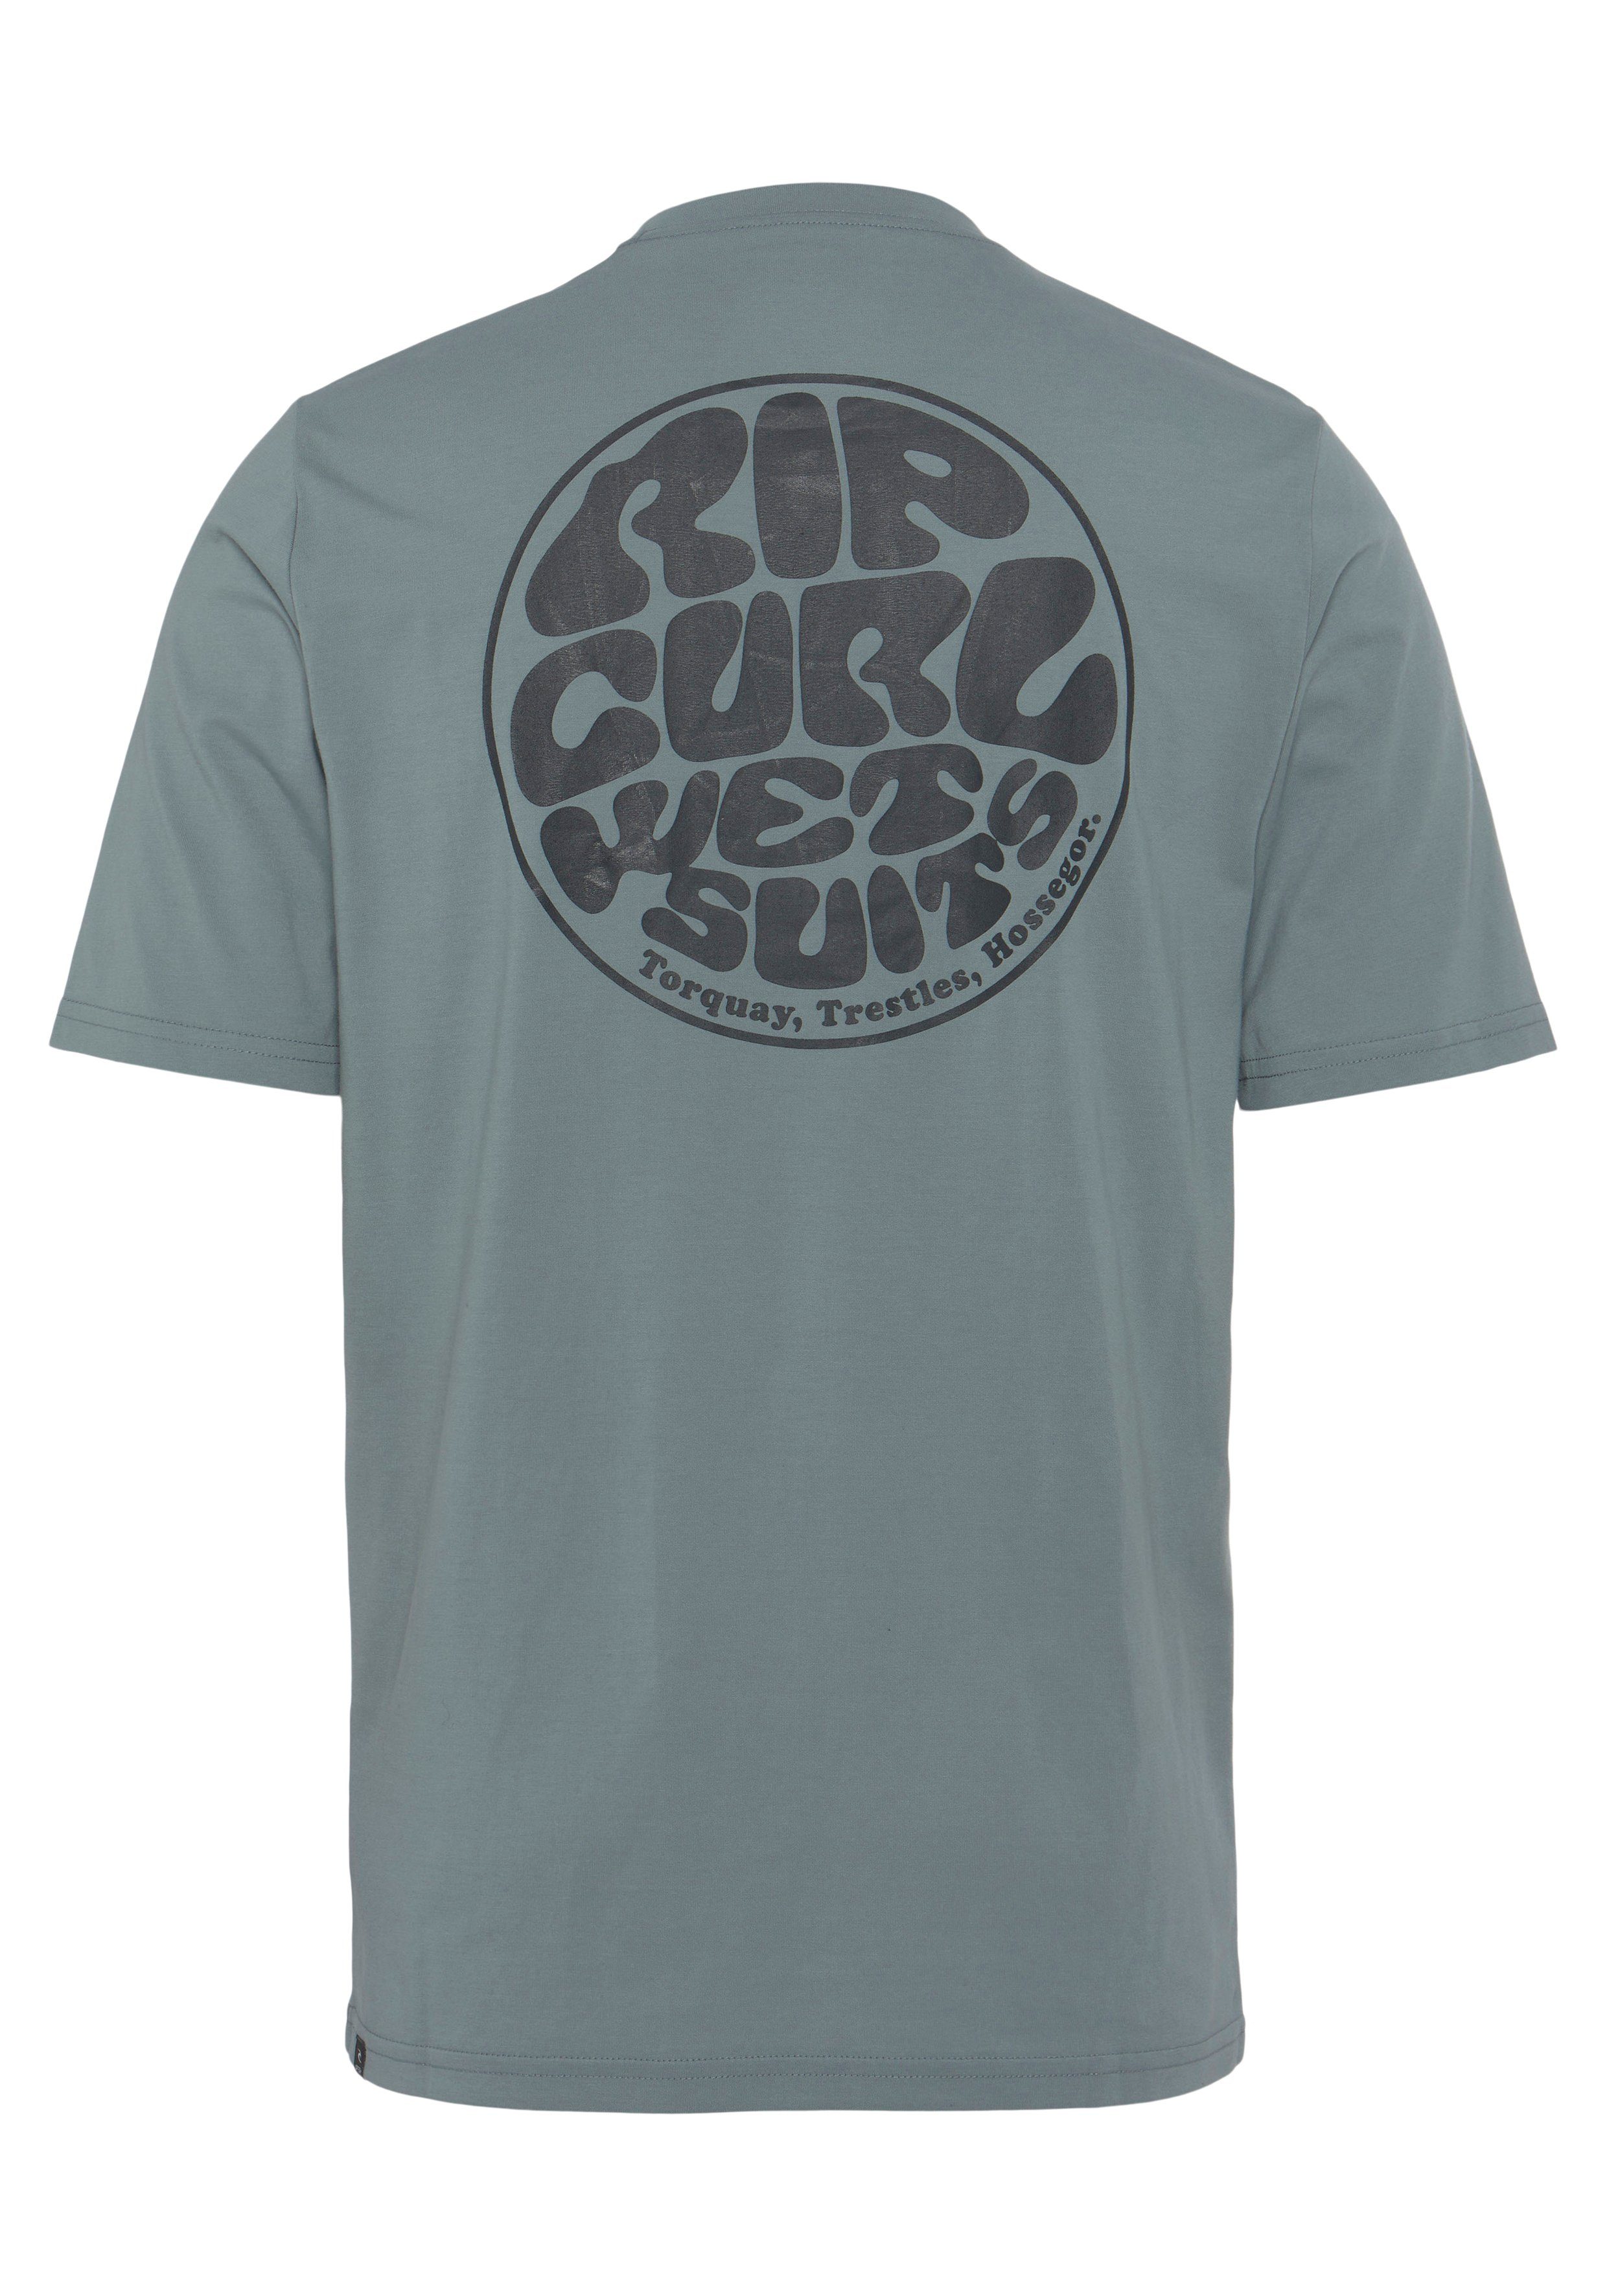 Rip Curl T-Shirt S/S SURF OF ICONS